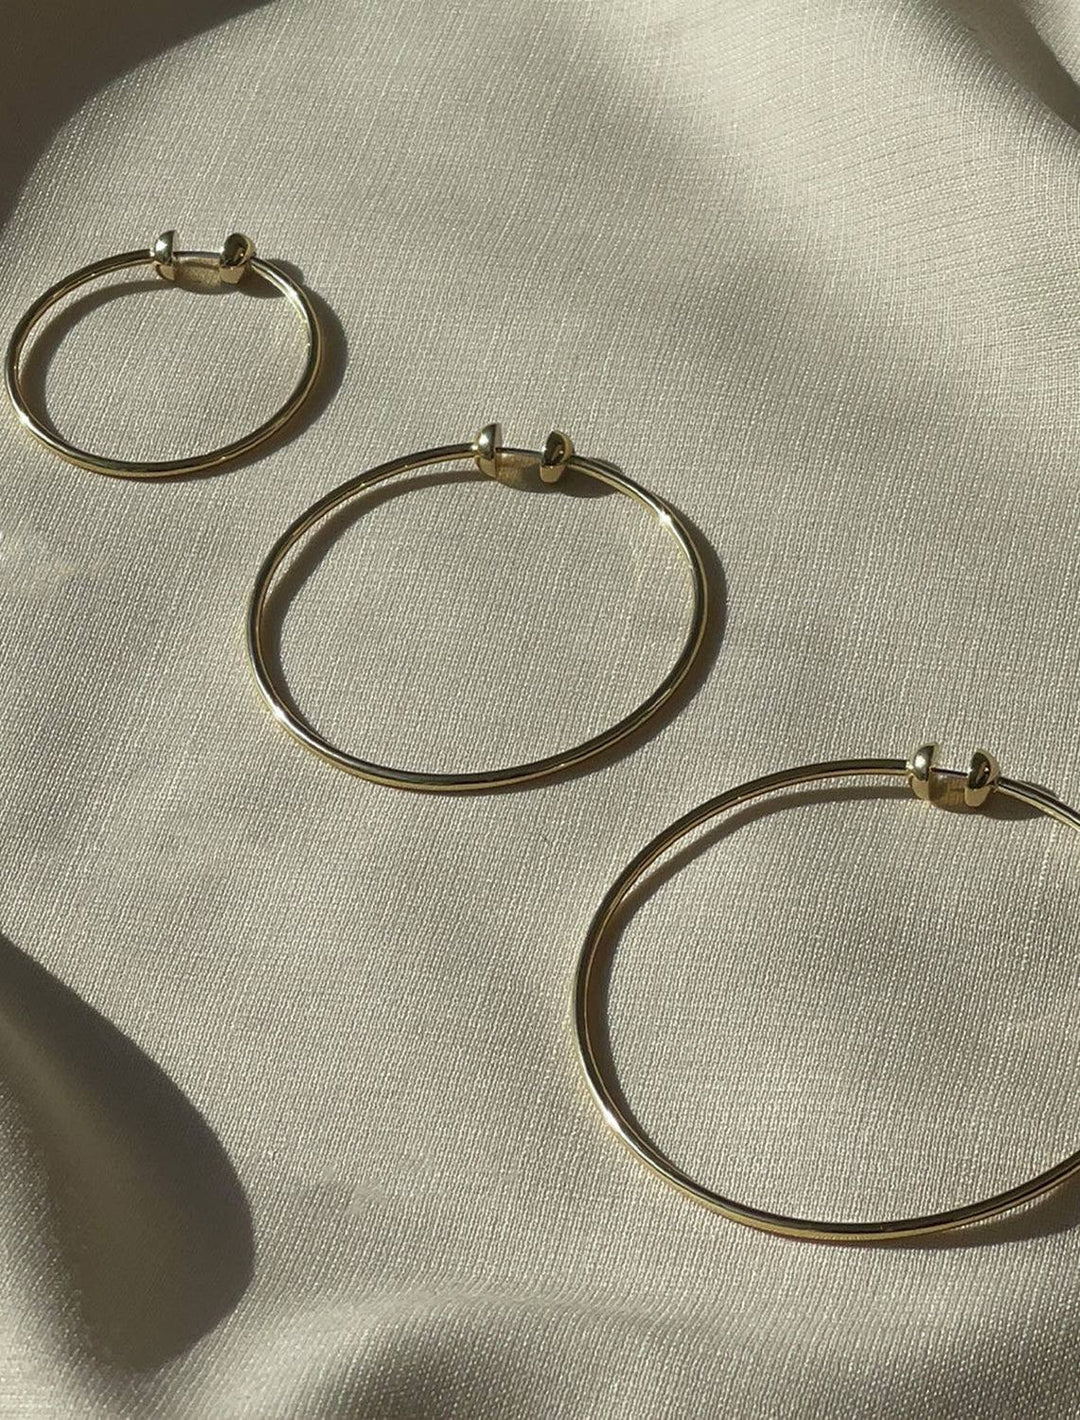 Jenny Bird new icon hoops in silver large - Twigs